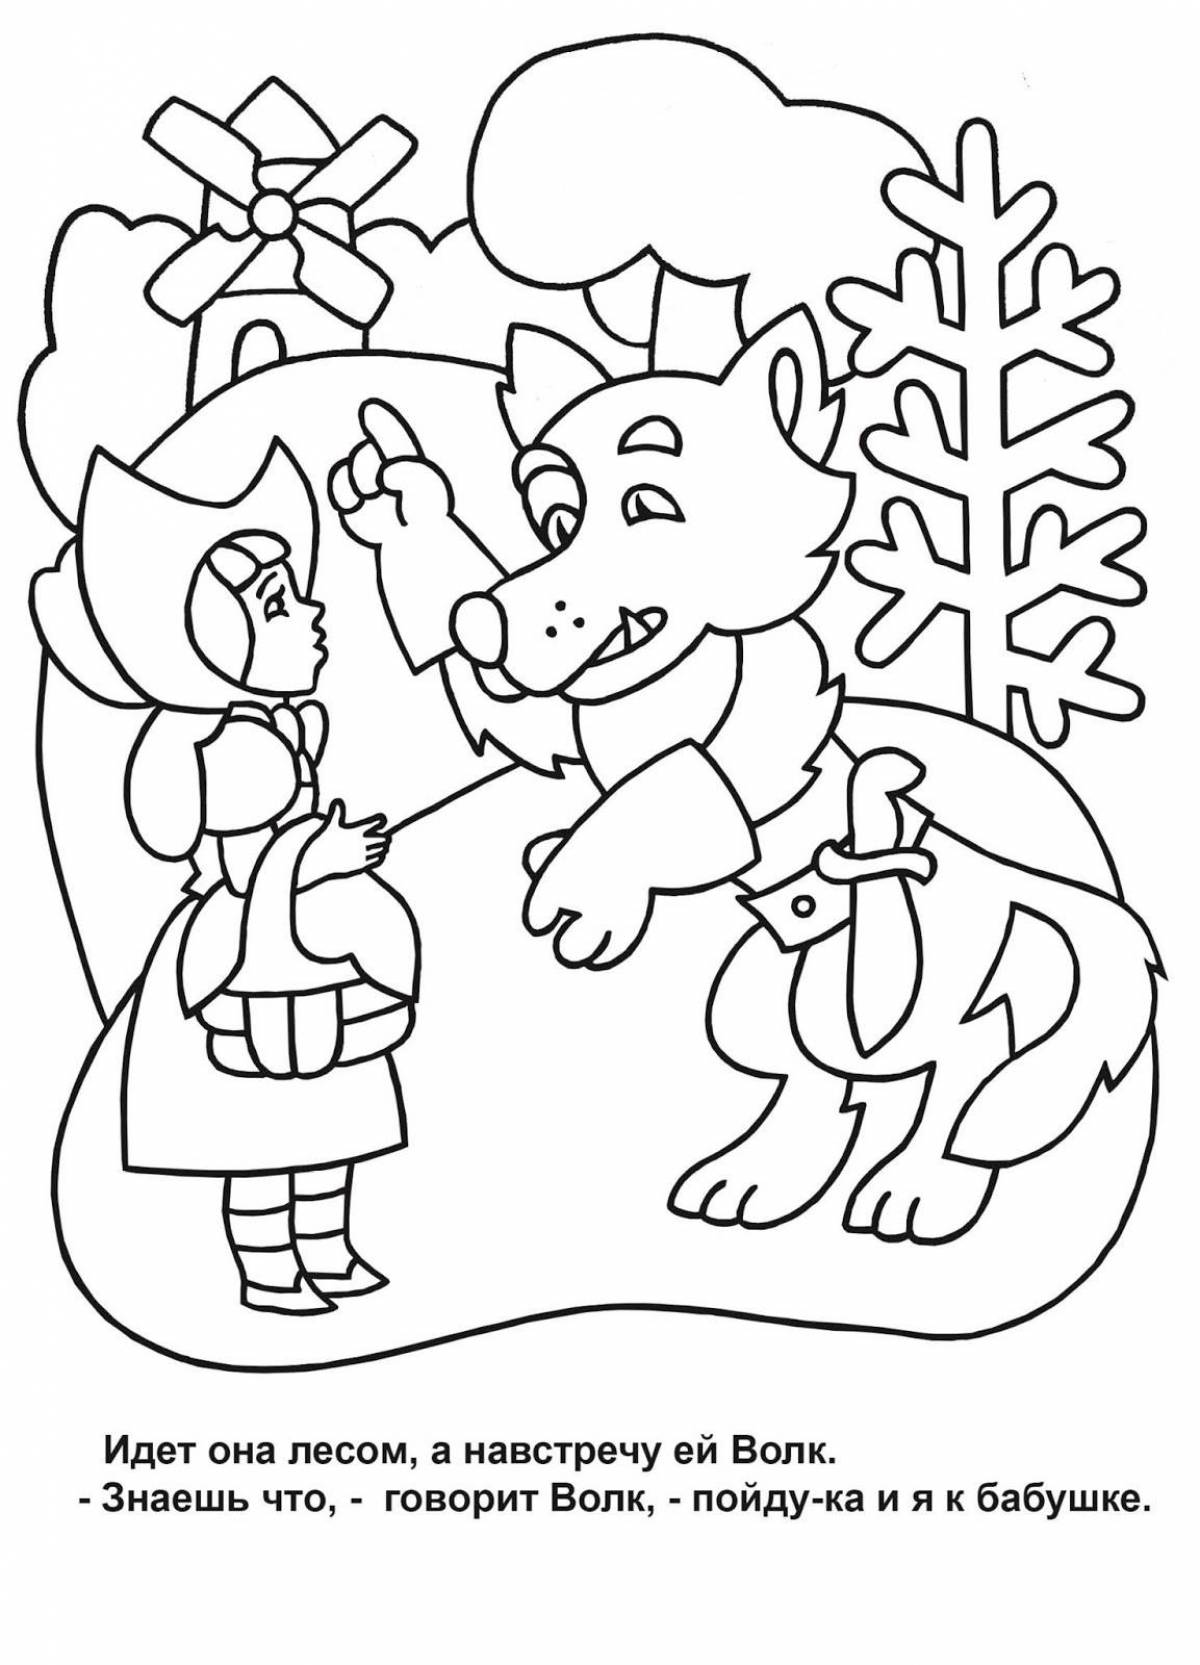 Charles Perrault's fairy tales inspirational coloring pages